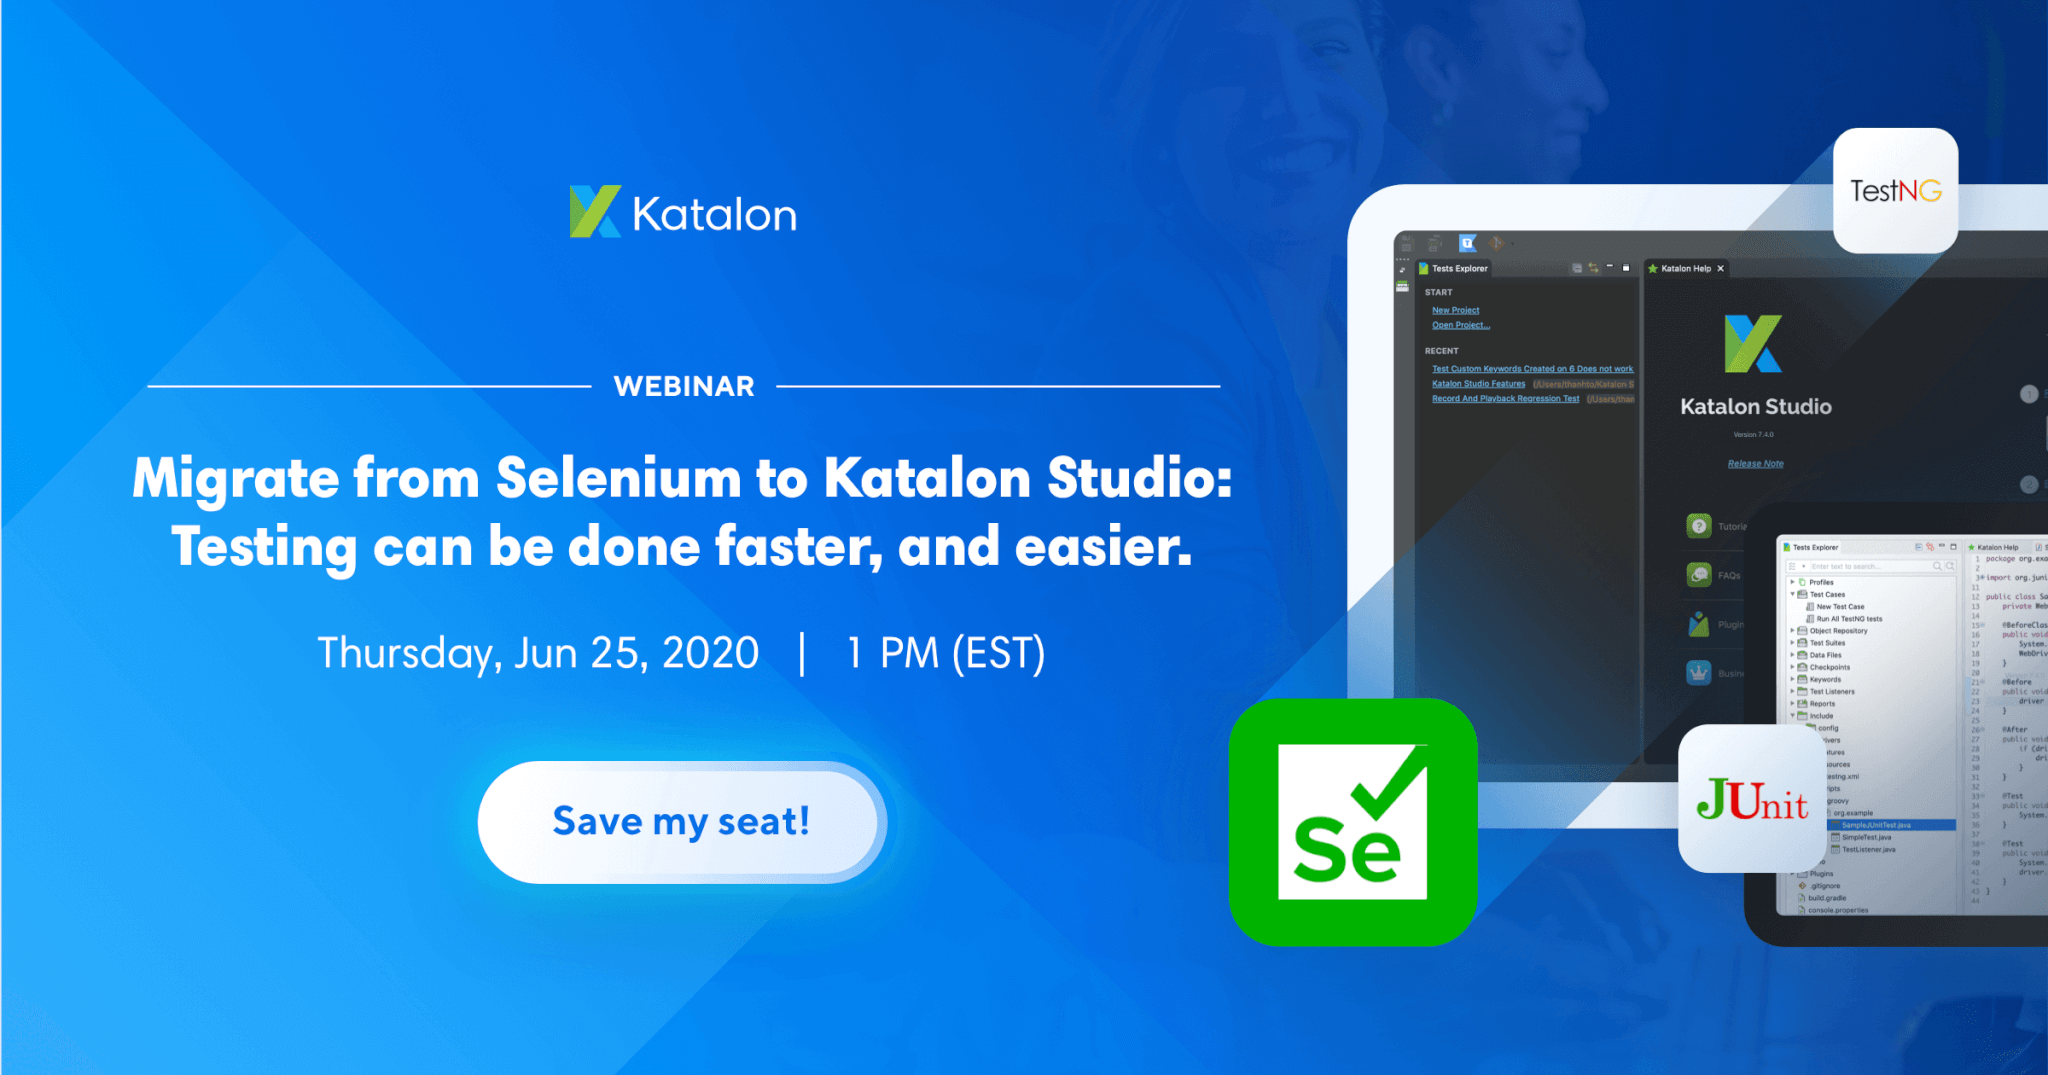 Migrate from Selenium to Katalon Studio: Testing can be done faster, and easier.